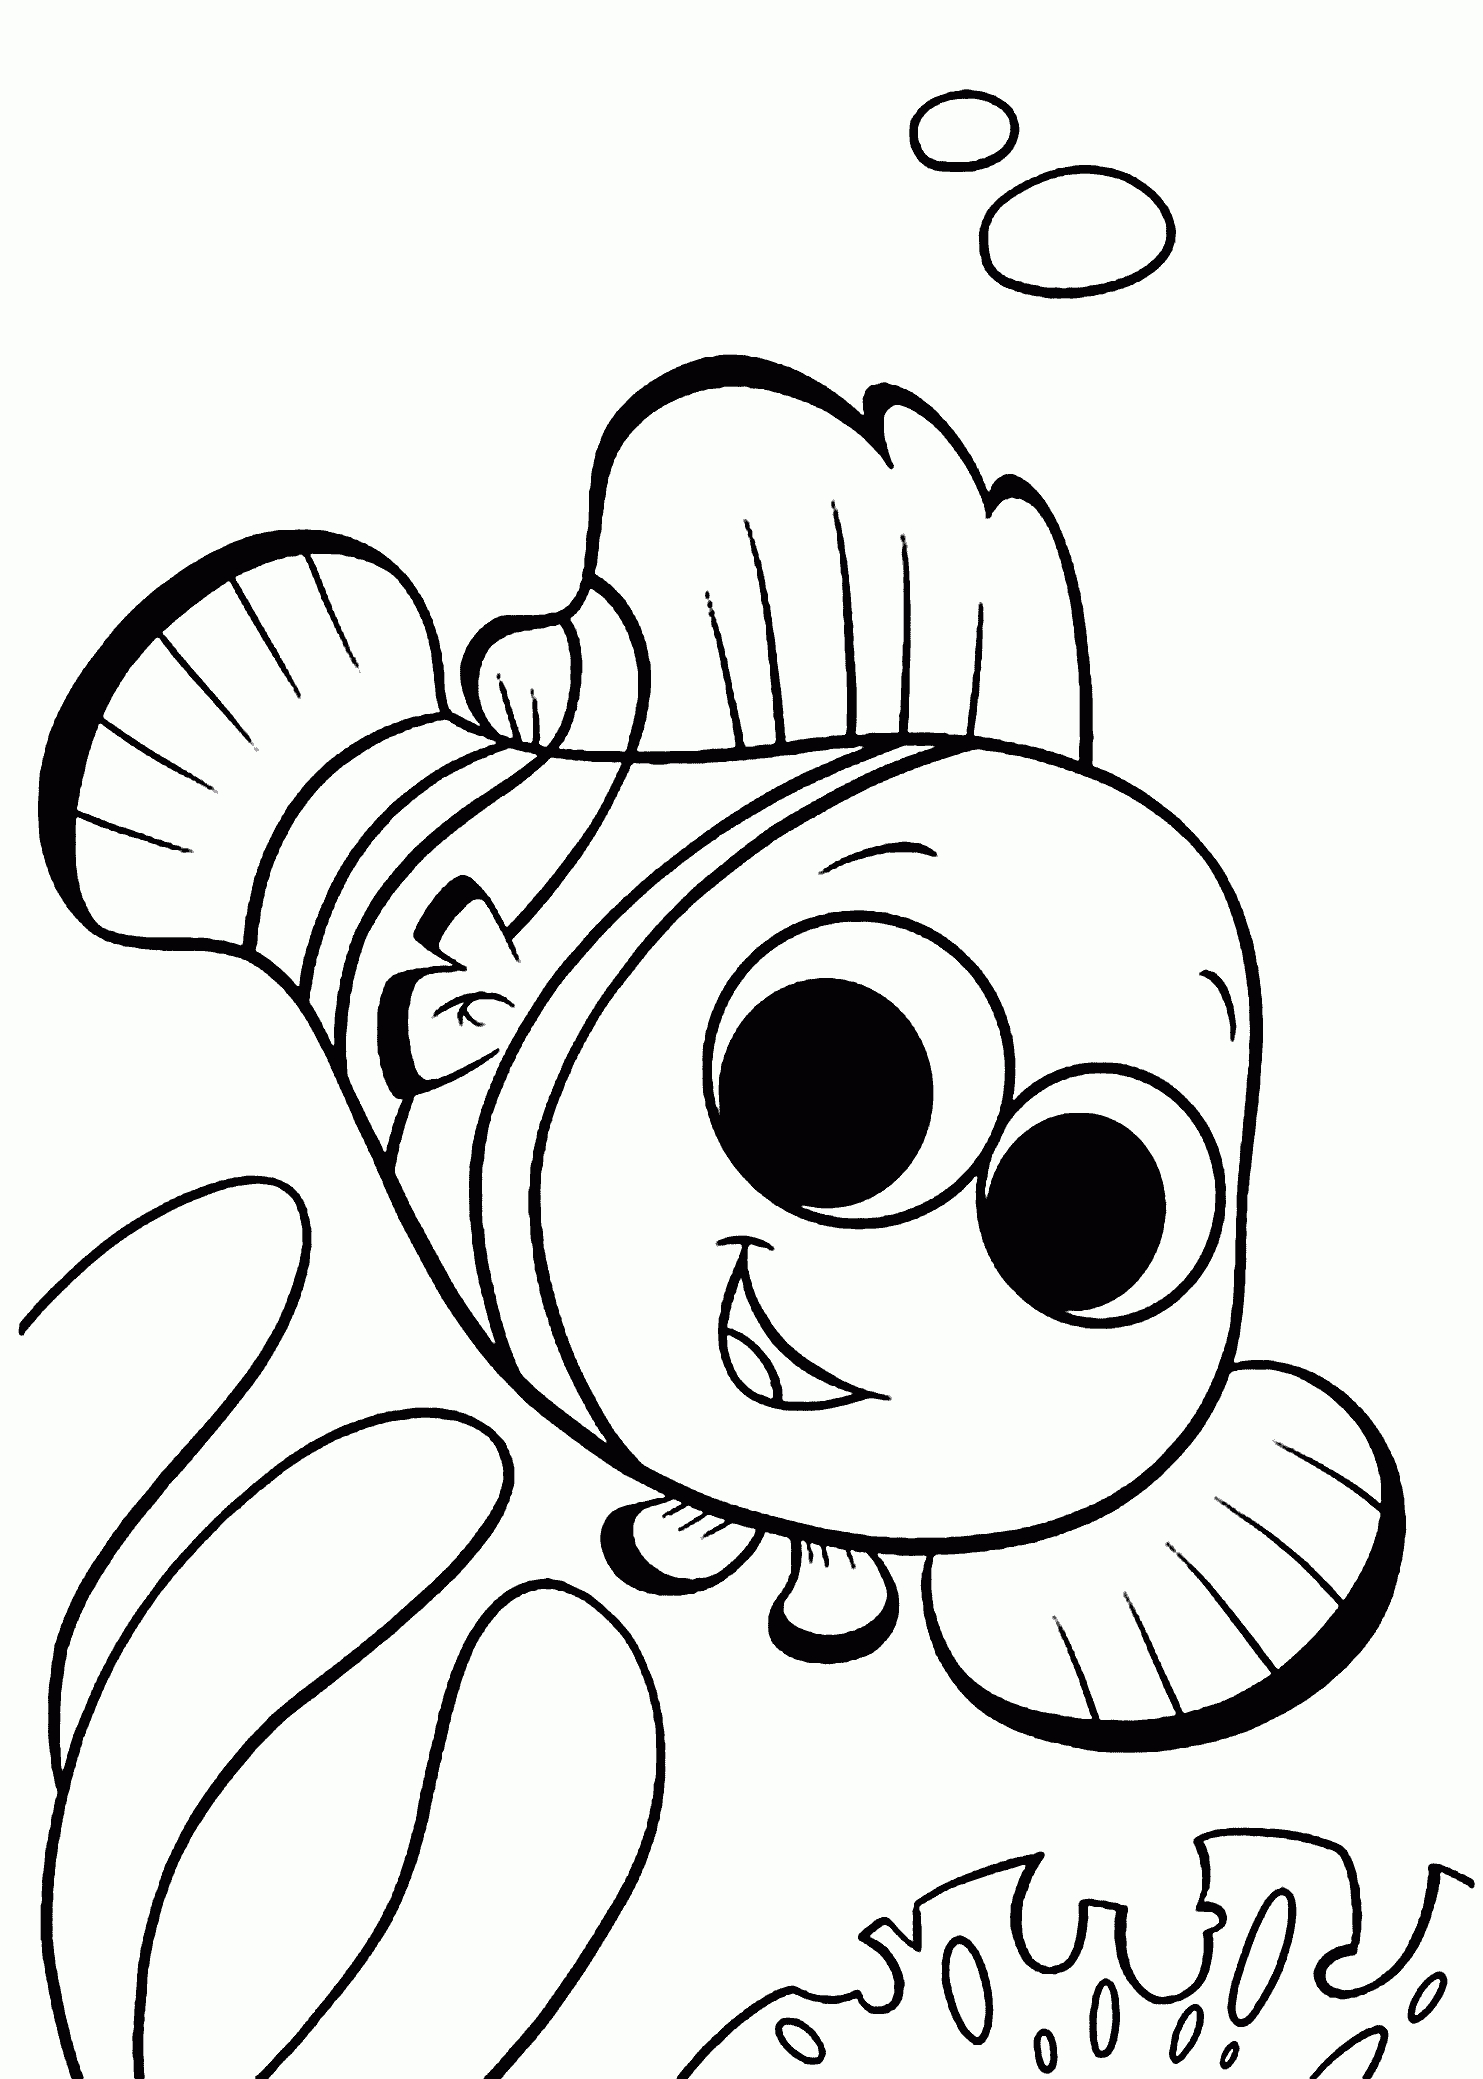 Finding Nemo Coloring Pages For Kids, Printable Free | Kids - Free Printable Coloring Pages For Kids